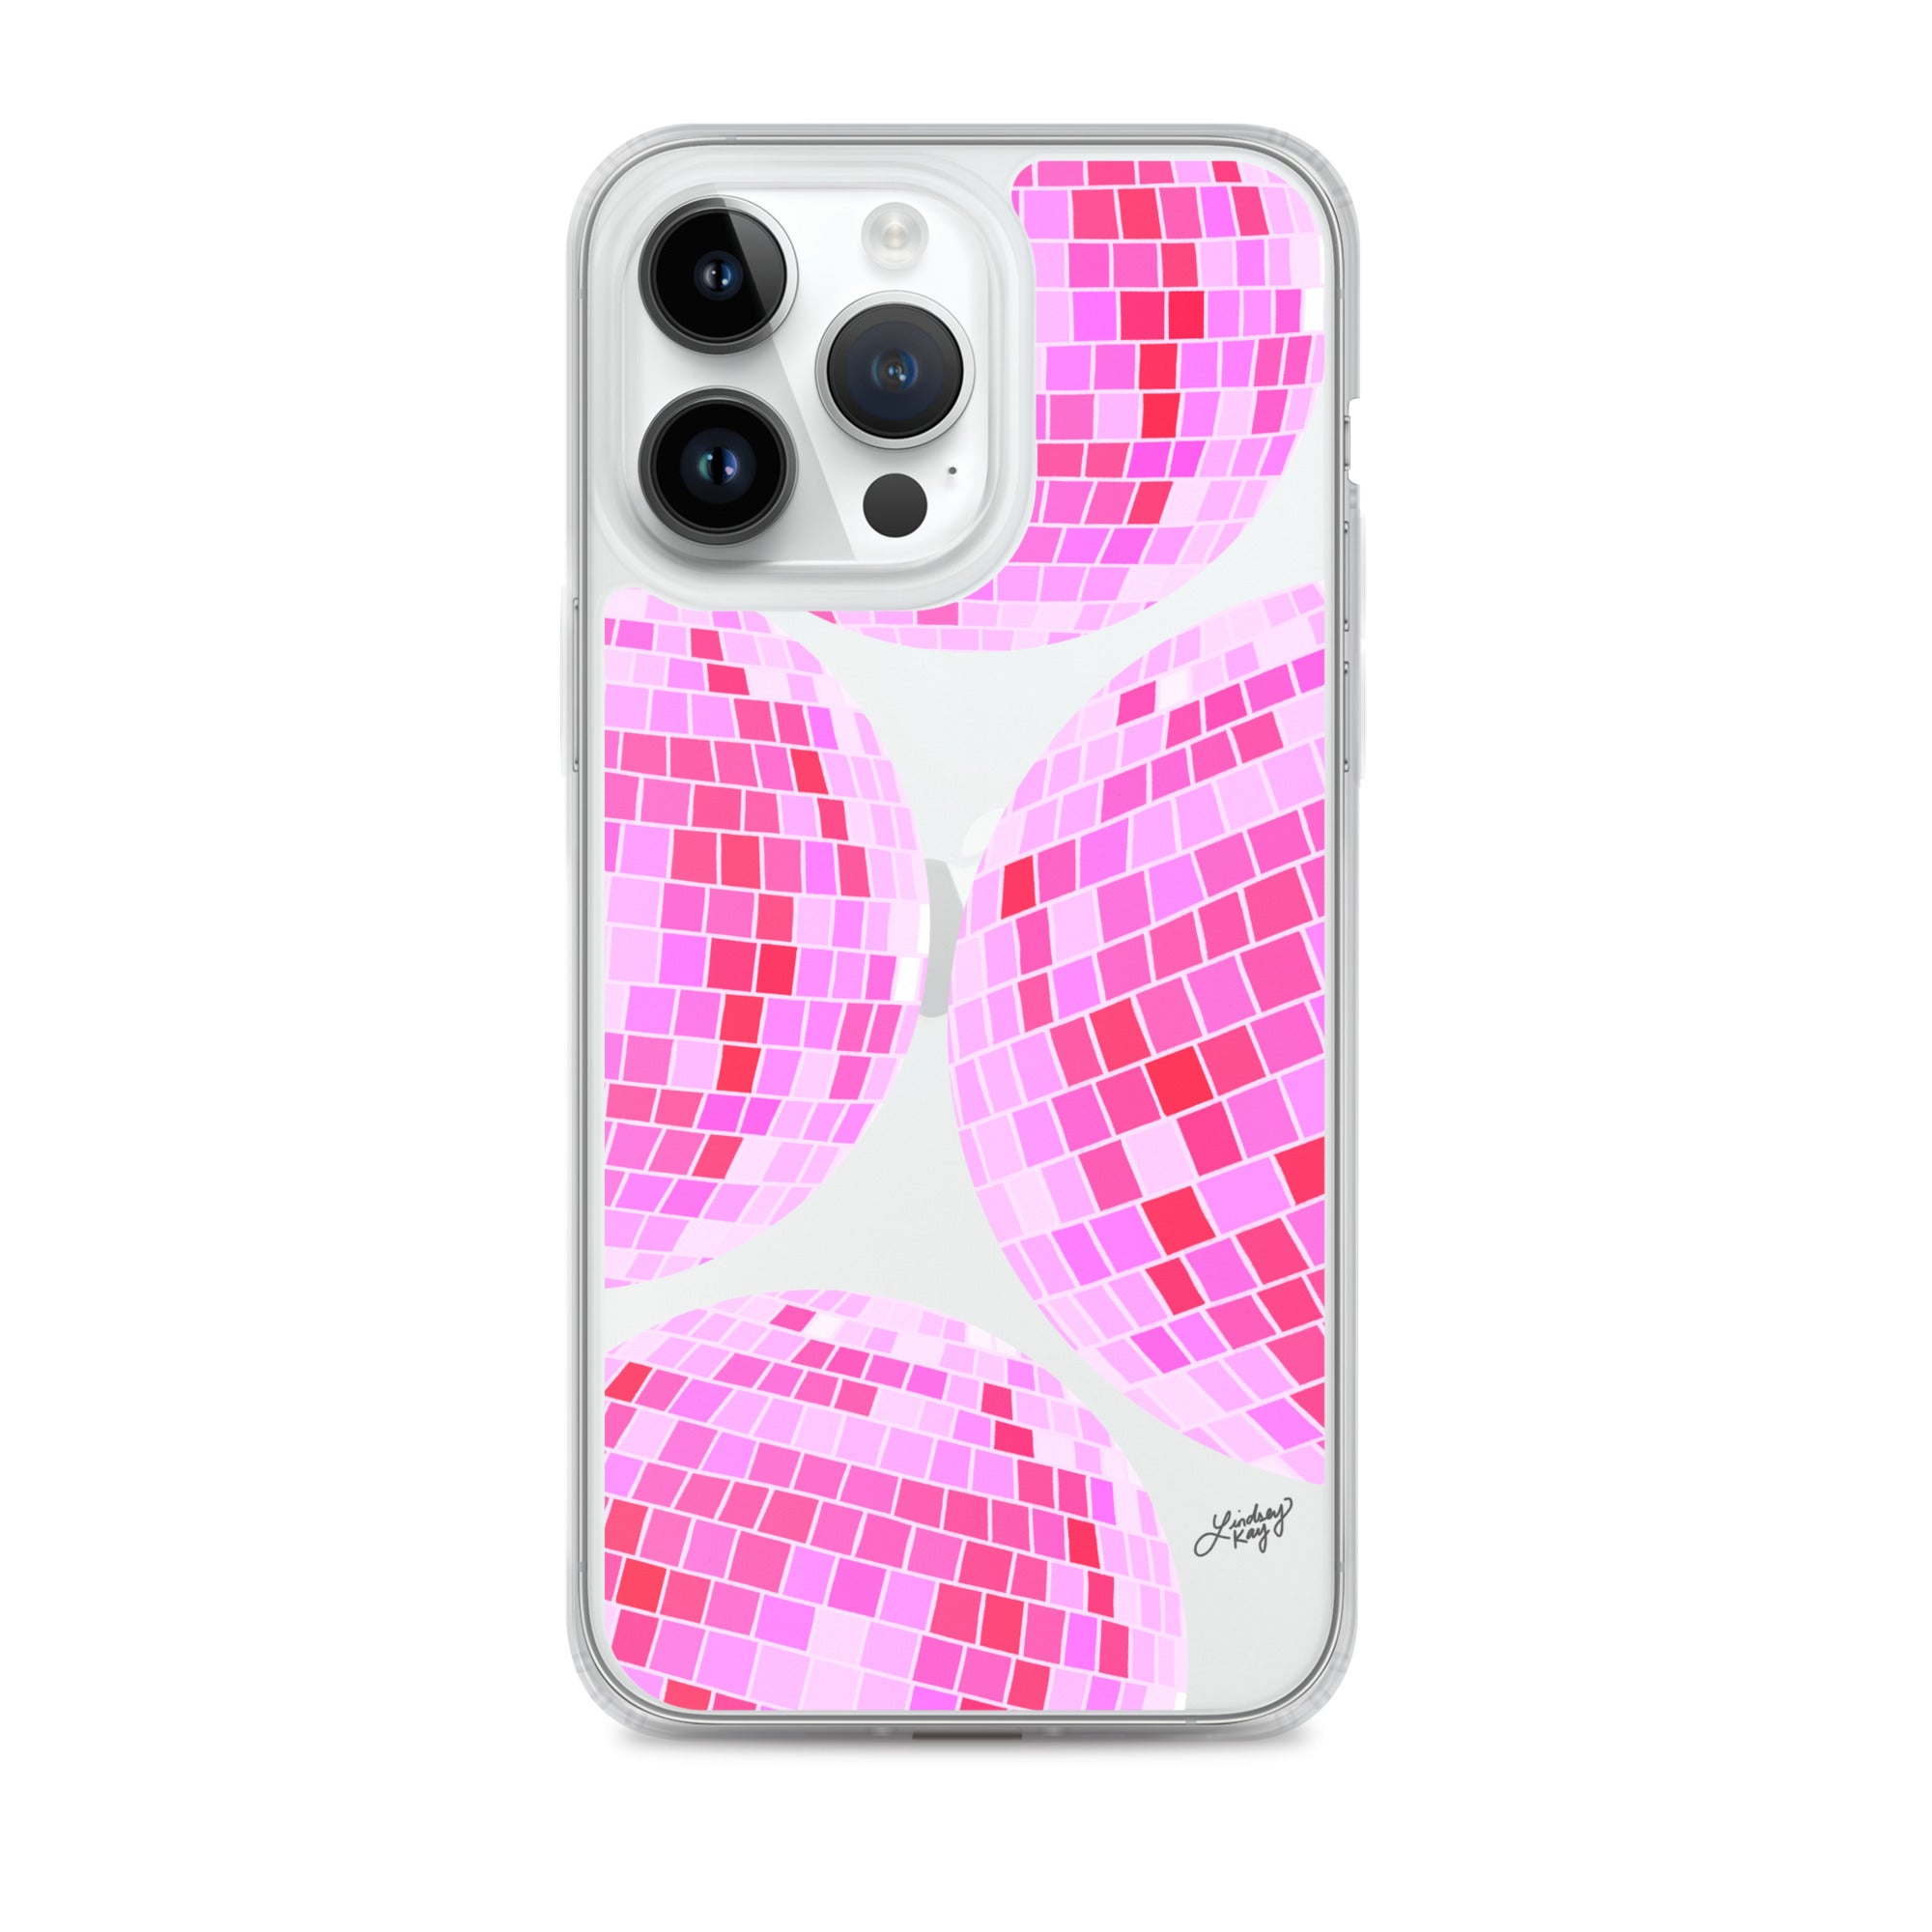 pink disco balls pattern illustration design iphone iphone-15 case cover protector clear tough mobile accessories trendy-iphone-case cute feminine phone-case lindsey kay collective 